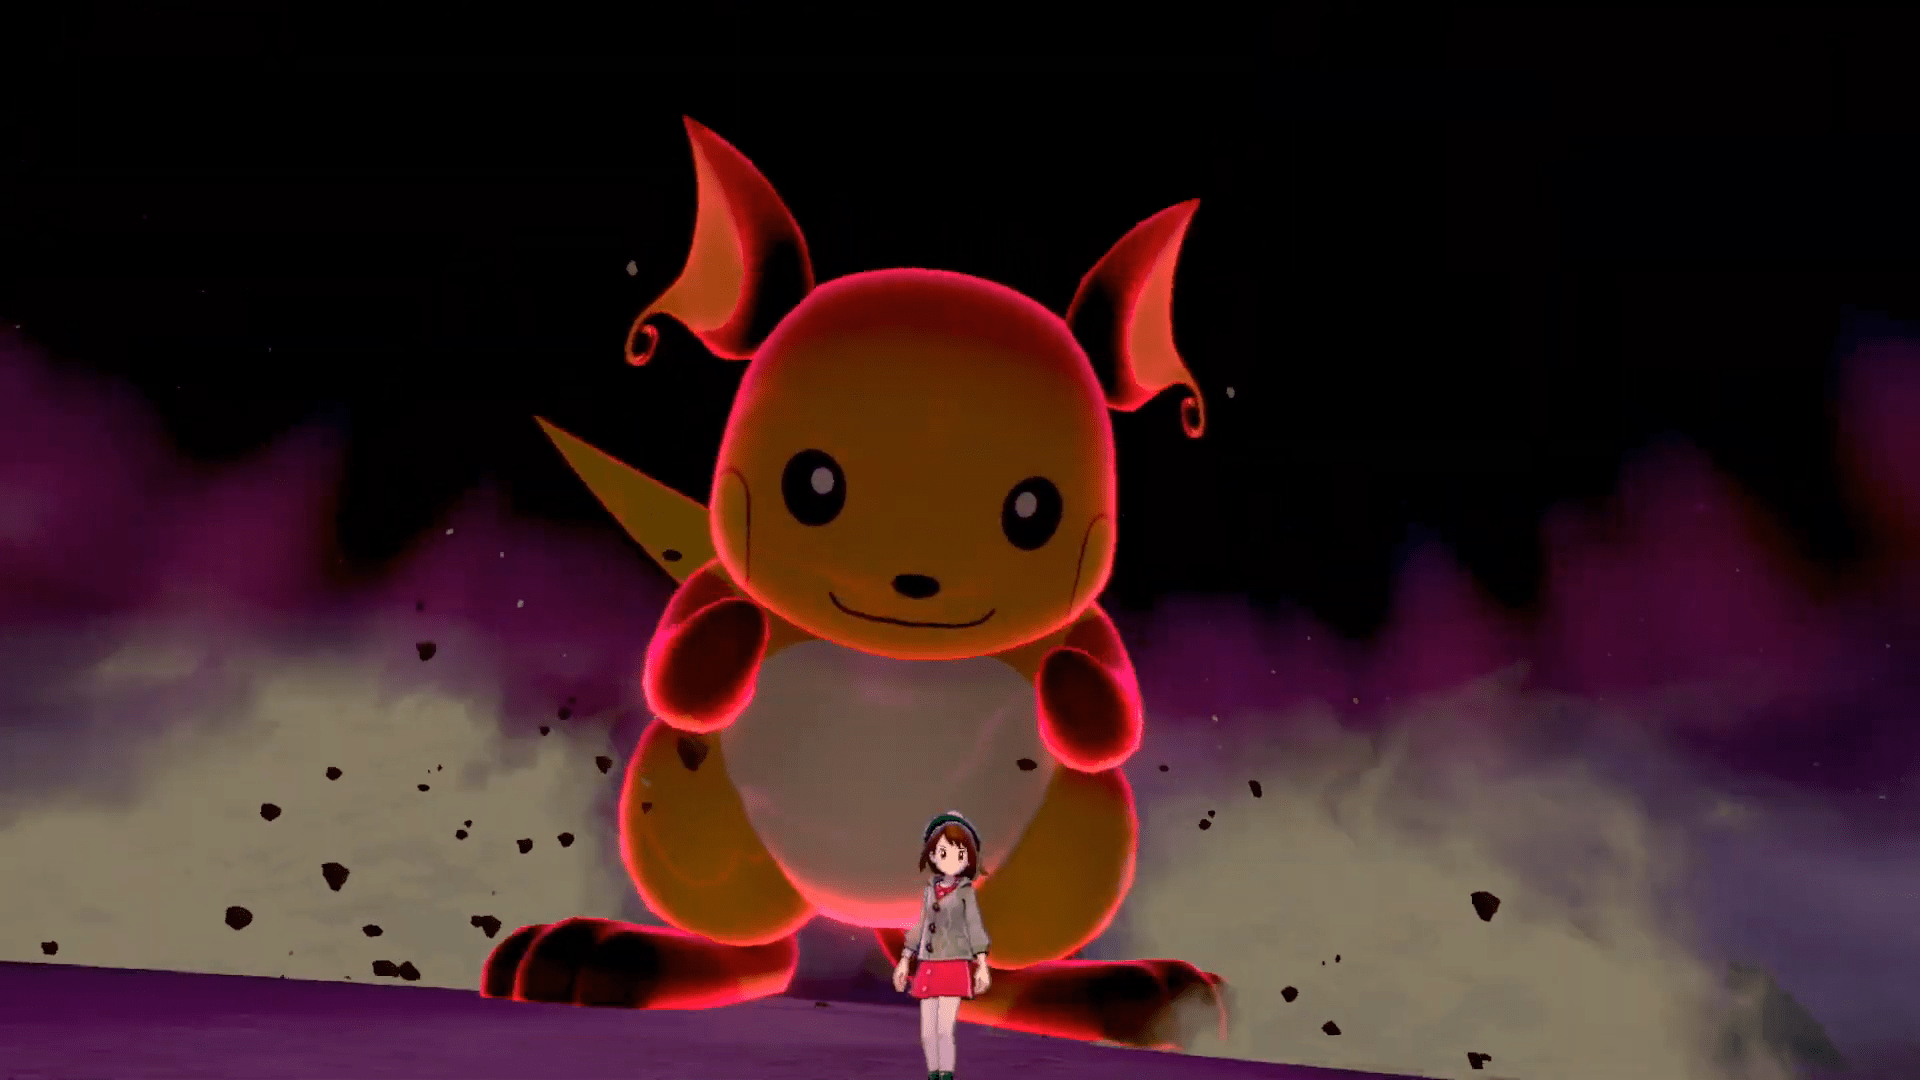 Nintendo Direct Reveals New Information On Pokemon Sword And Shield